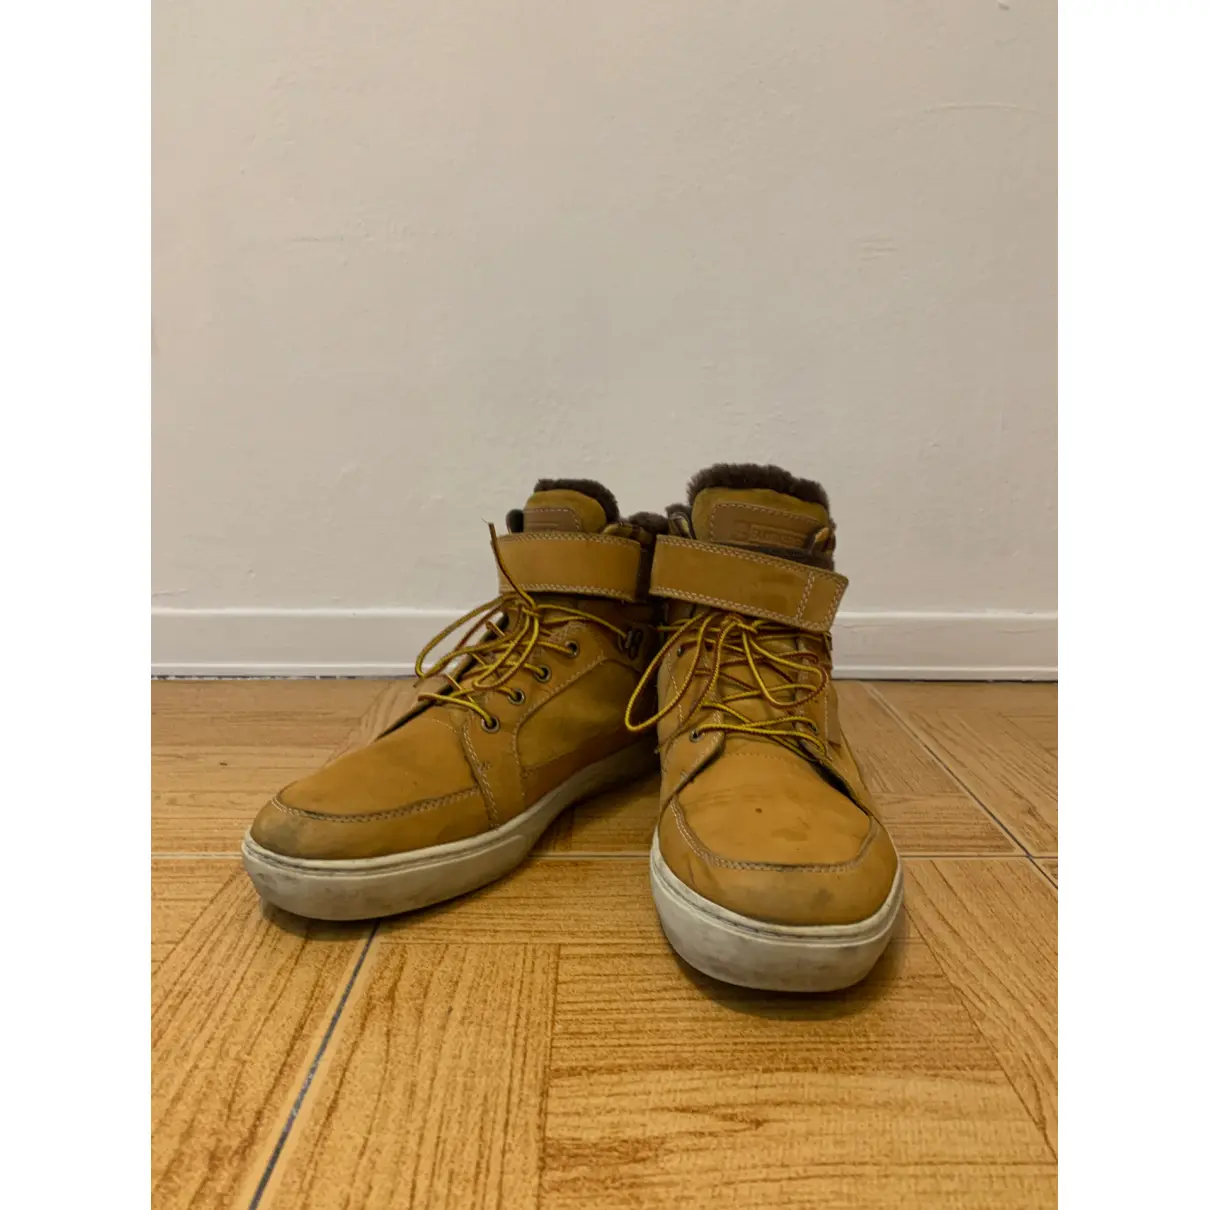 Buy Timberland Boots online